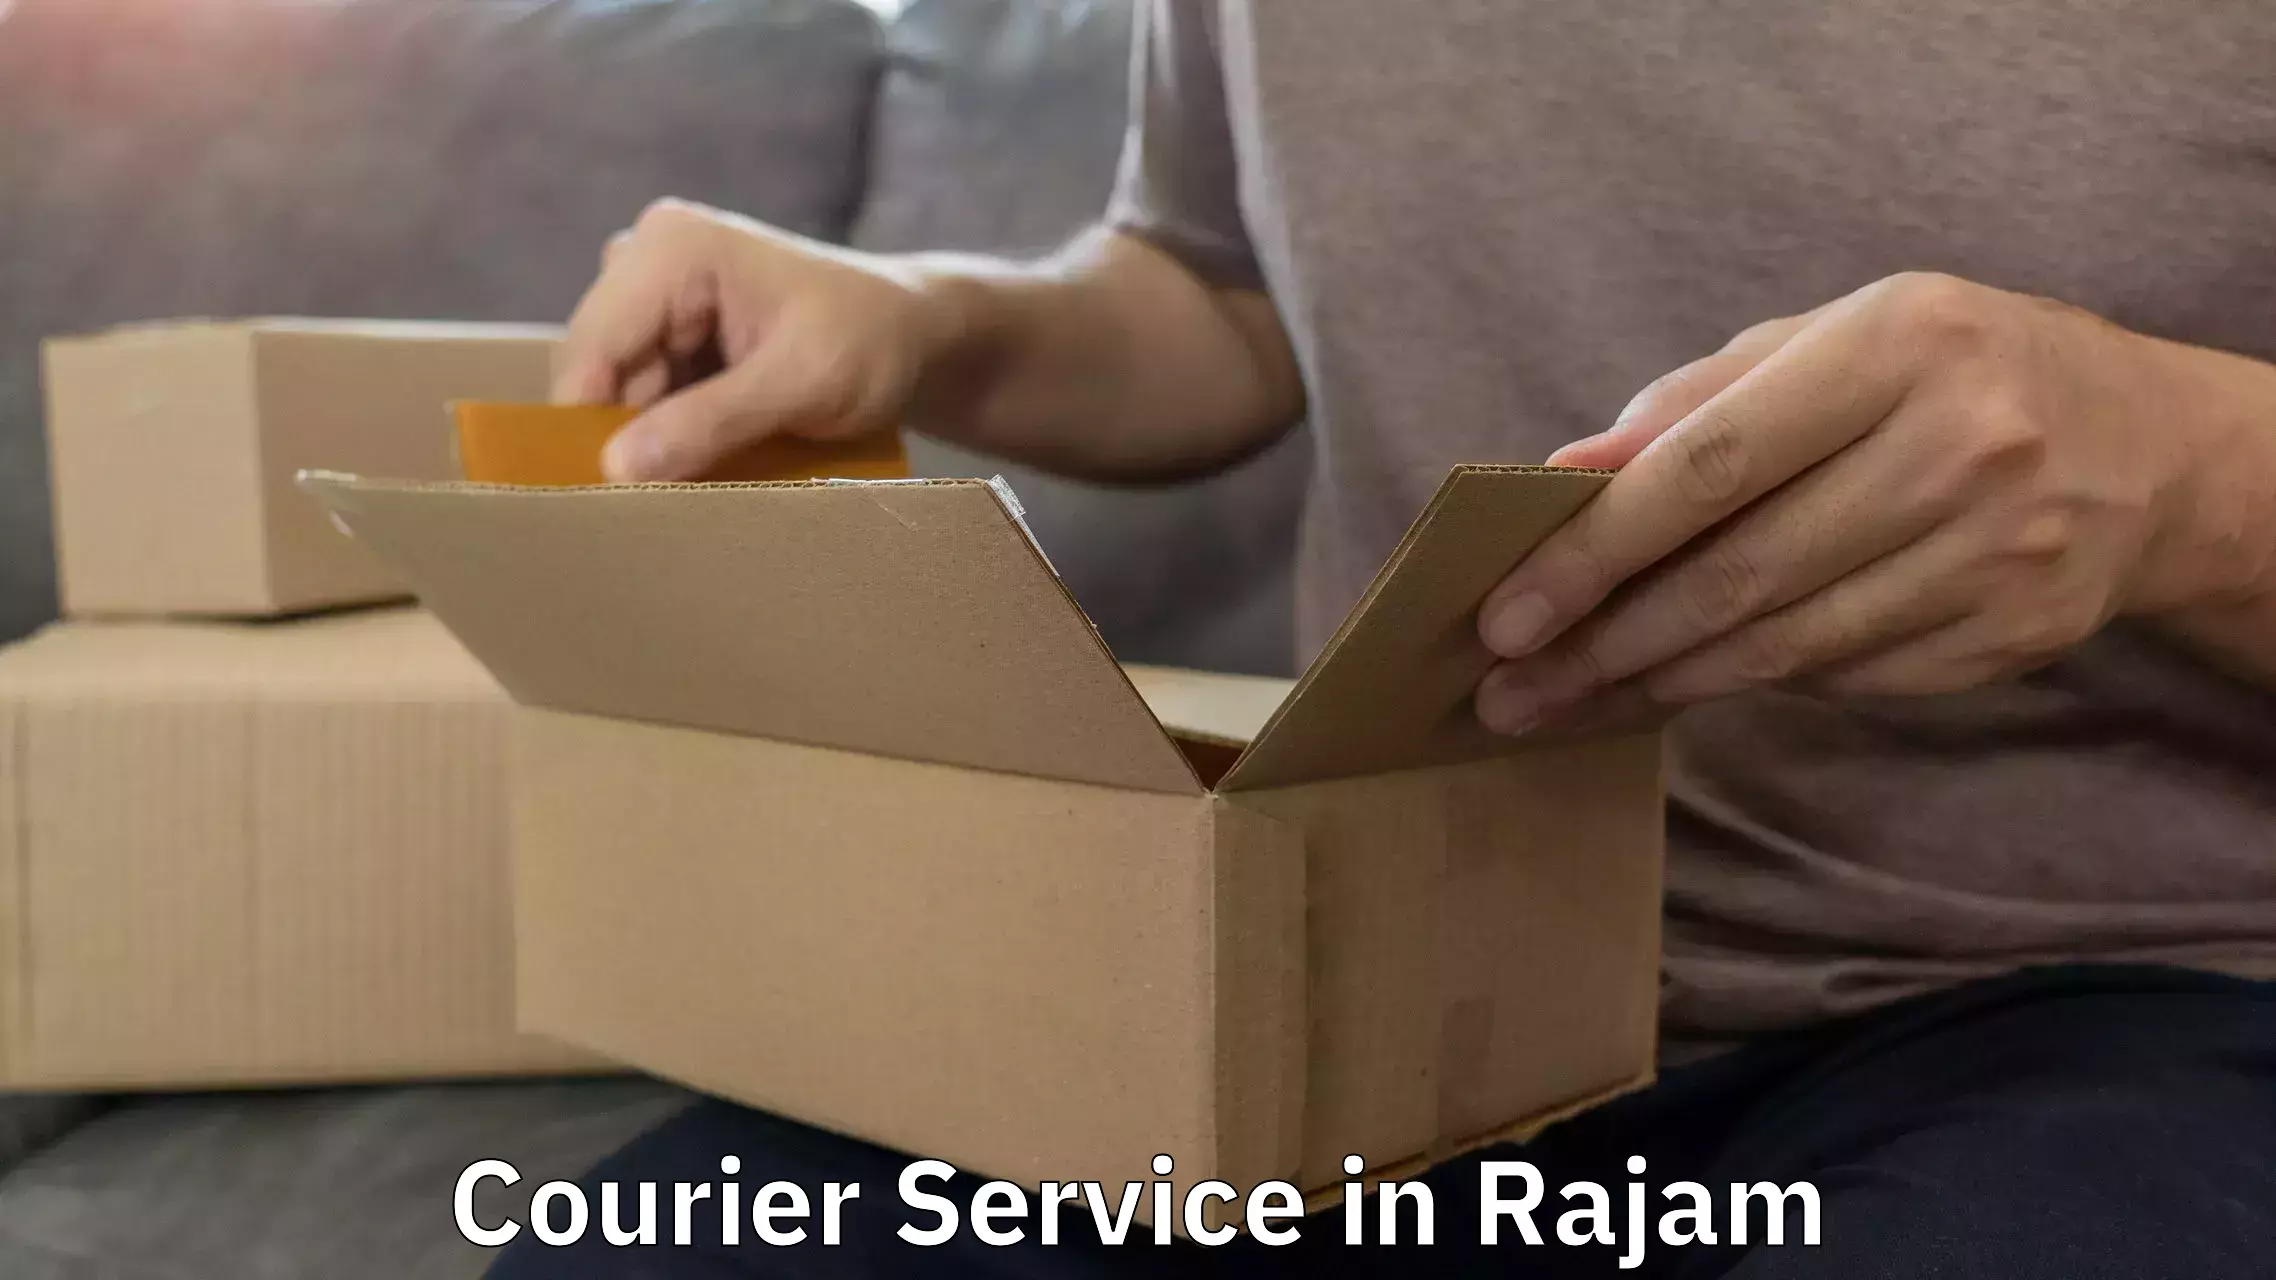 Dynamic courier operations in Rajam